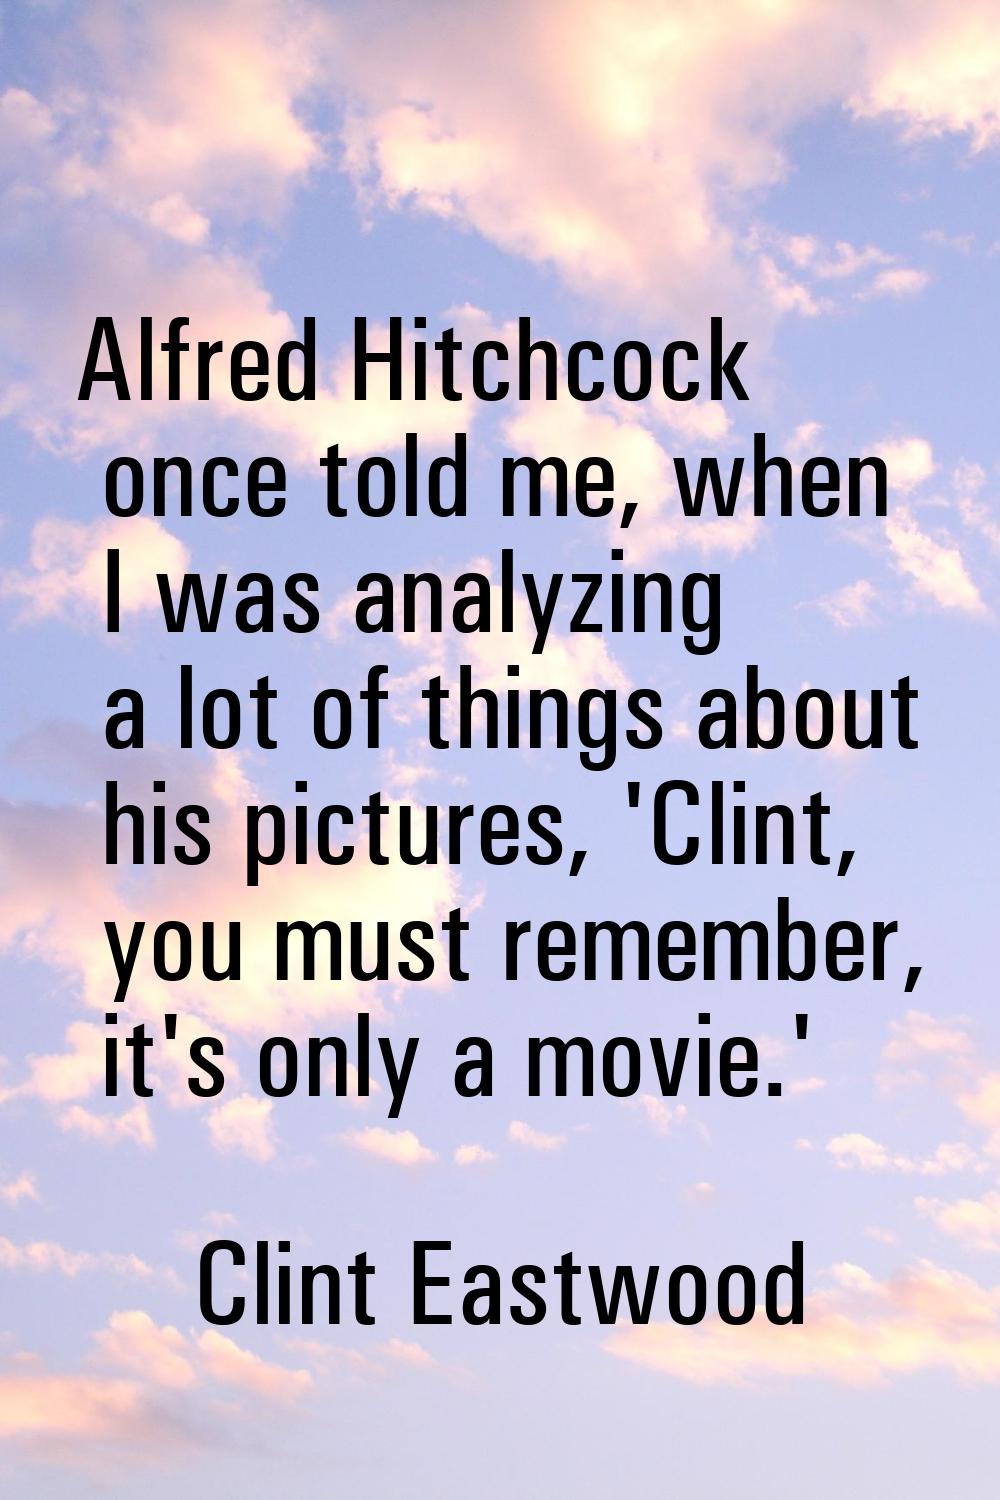 Alfred Hitchcock once told me, when I was analyzing a lot of things about his pictures, 'Clint, you